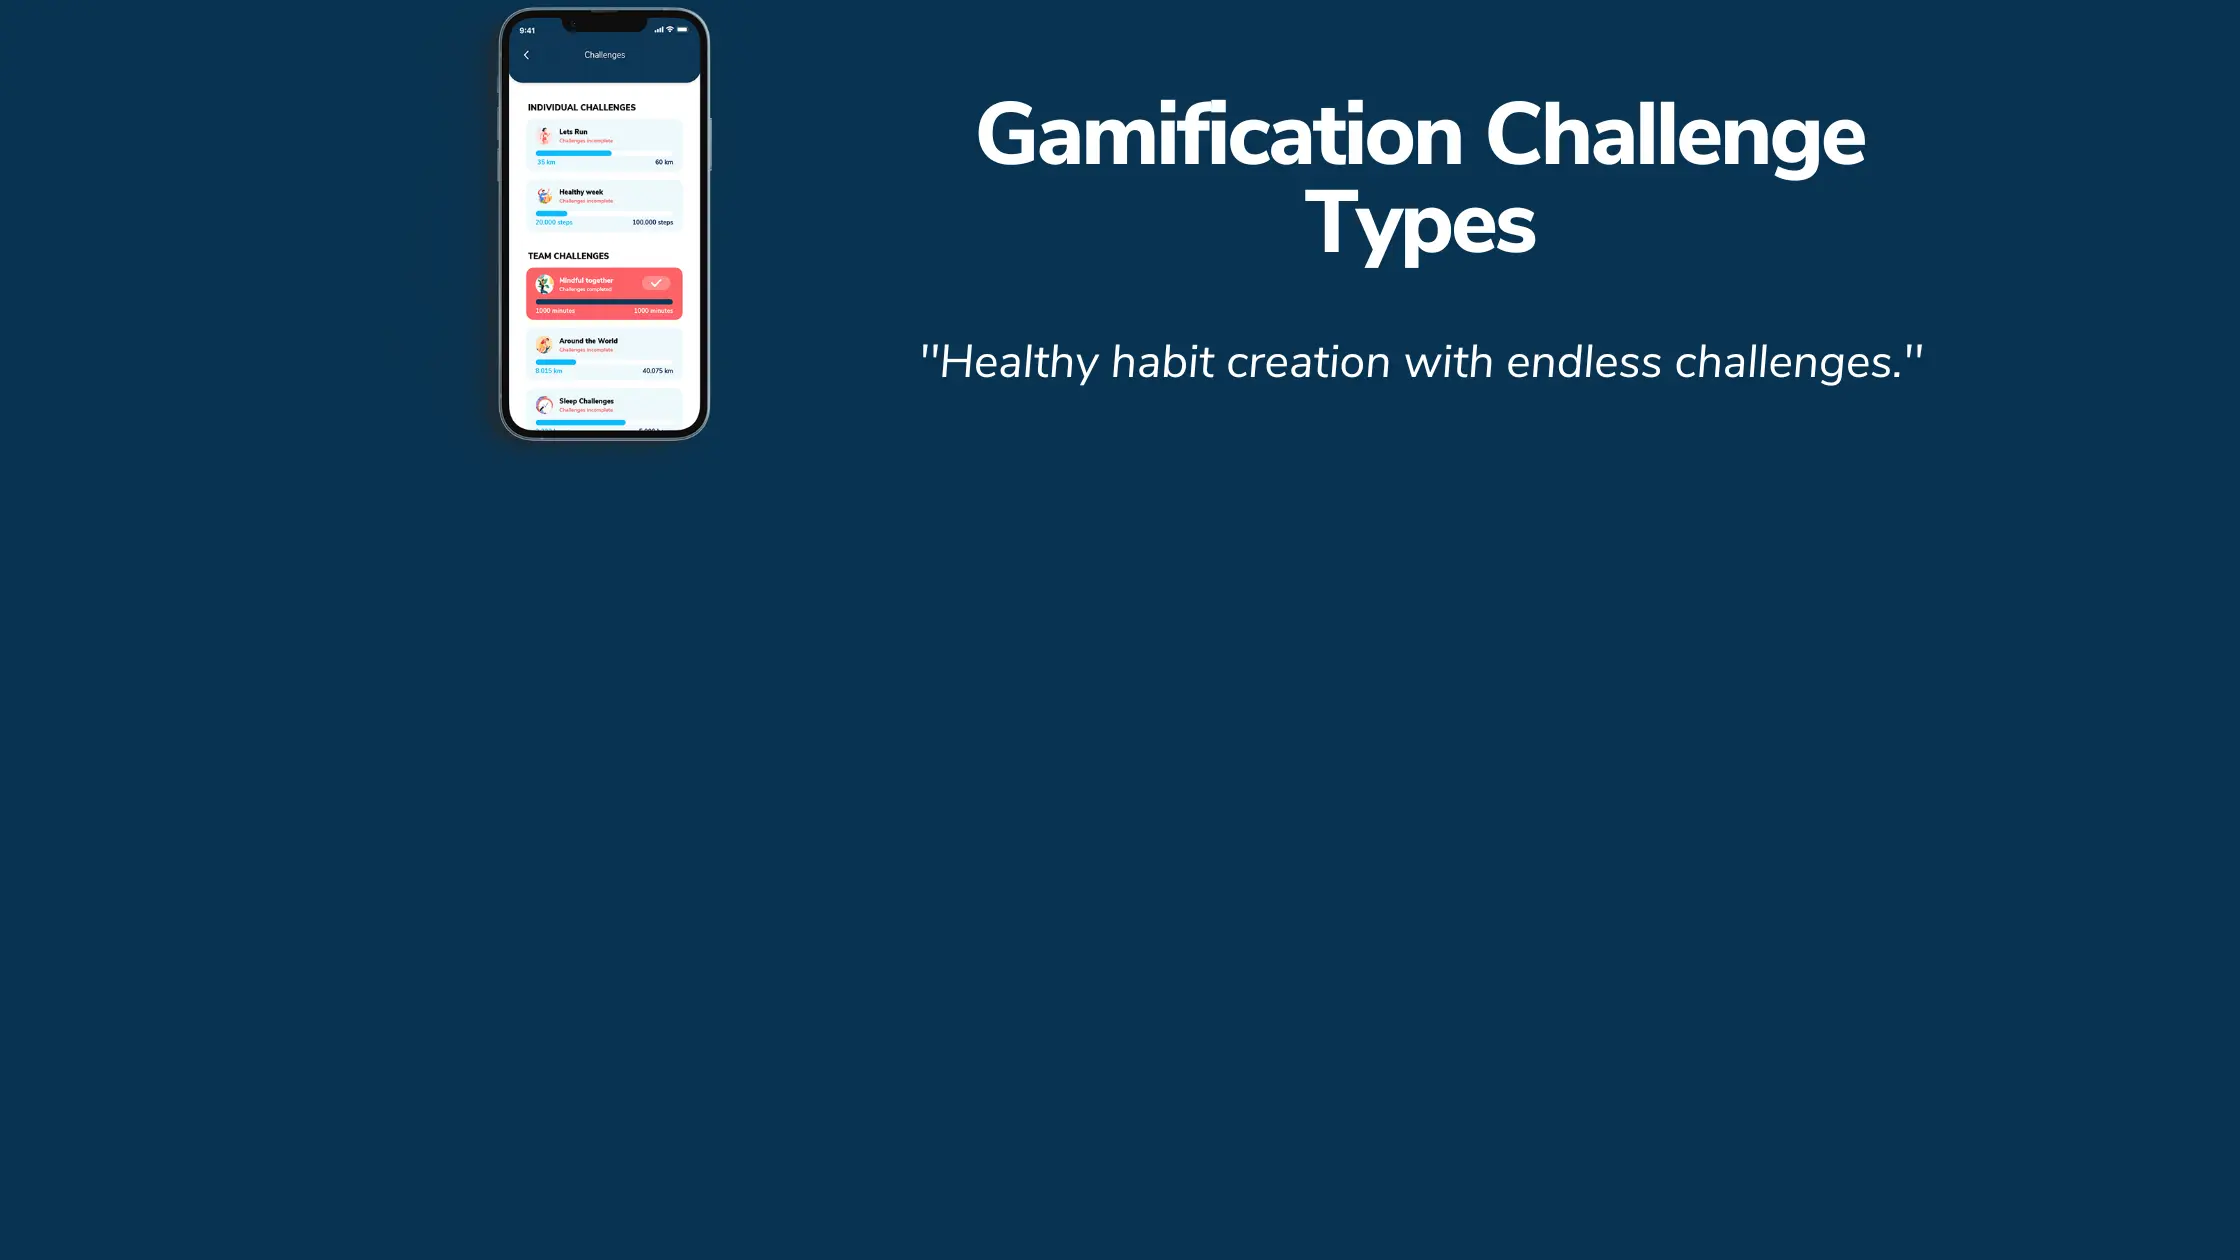 Gamification Challenge Types